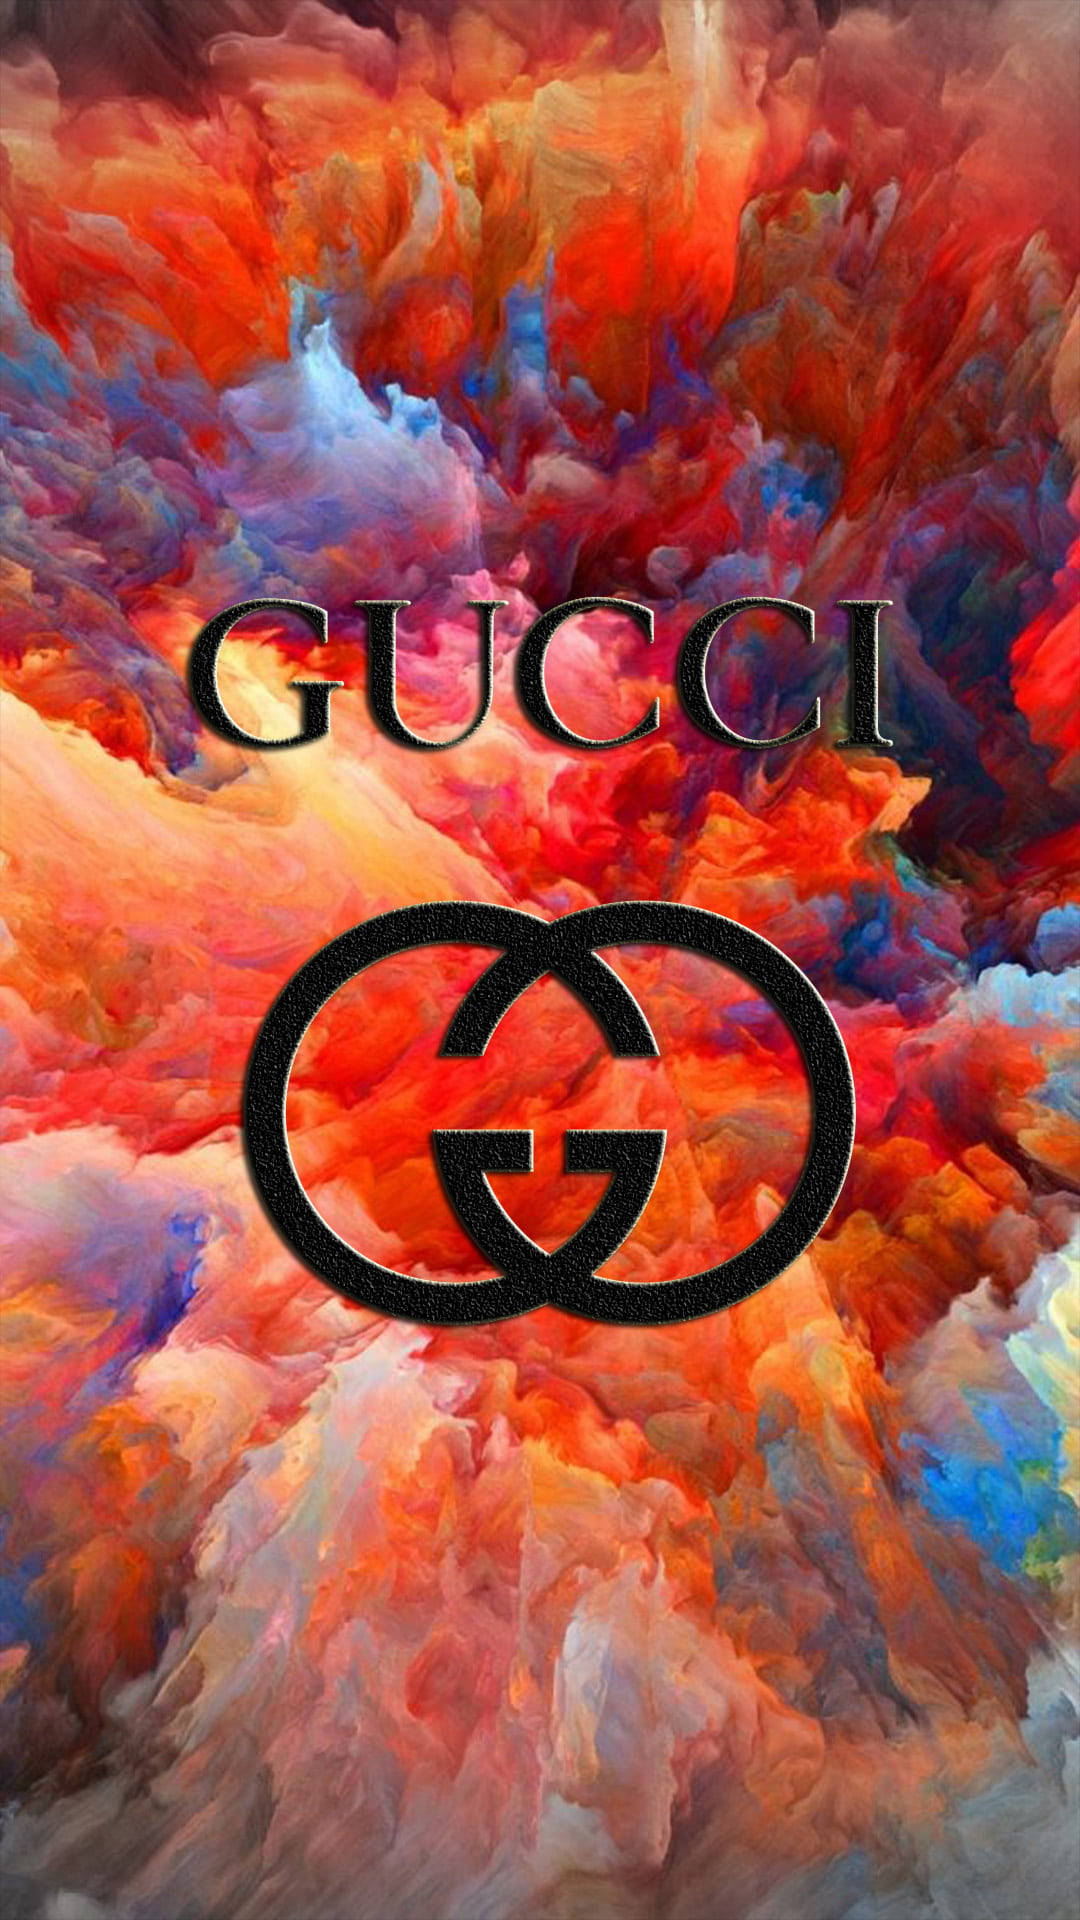 Pin on бренды  Gucci wallpaper iphone, Iphone wallpaper fashion, Iphone  wallpaper stills